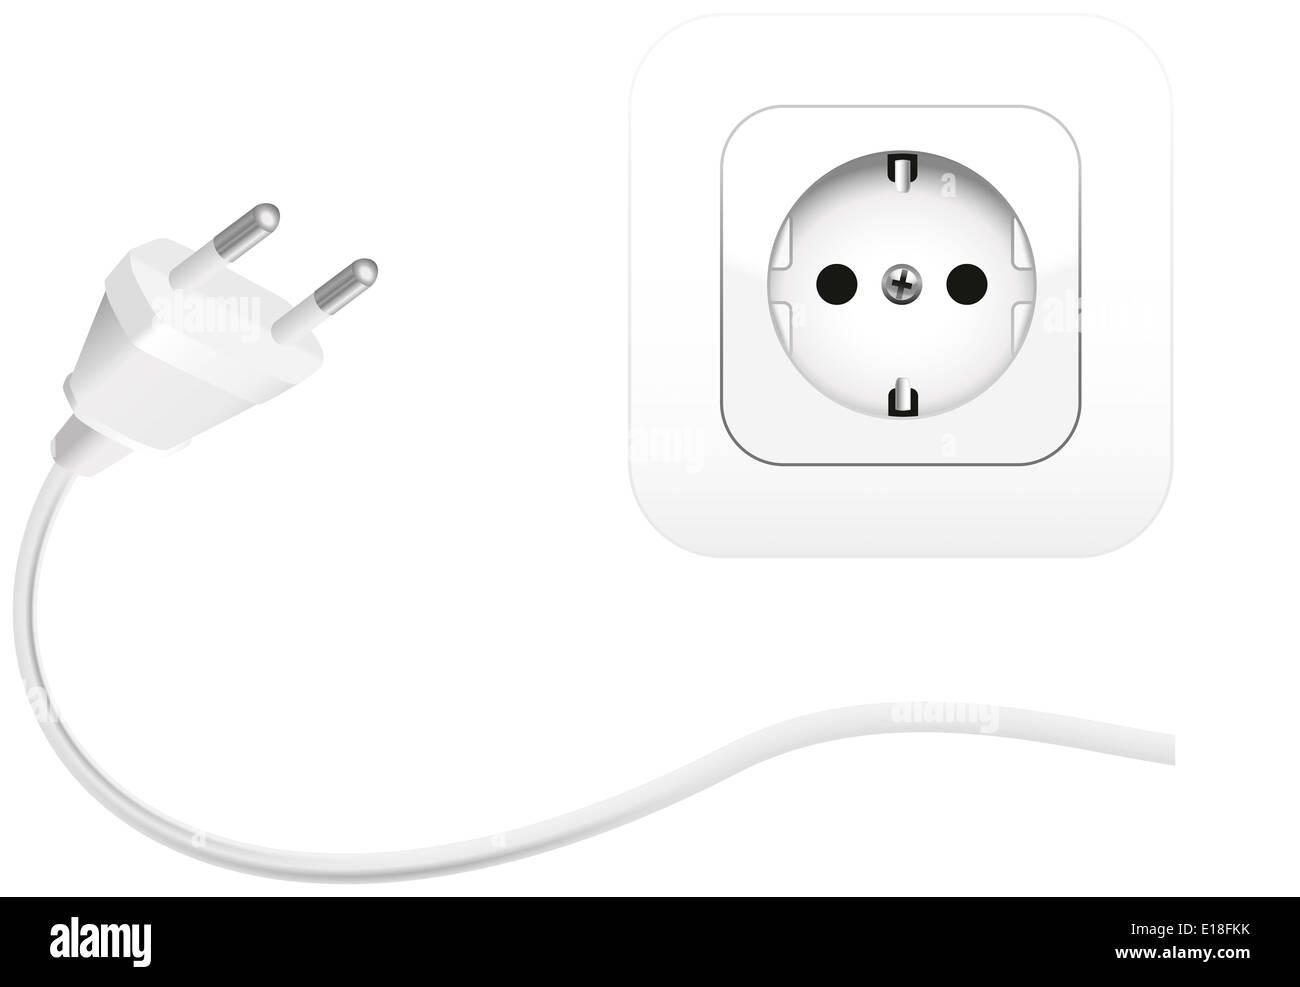 Illustration of a plug and a socket to connect electrical equipment. Stock Photo